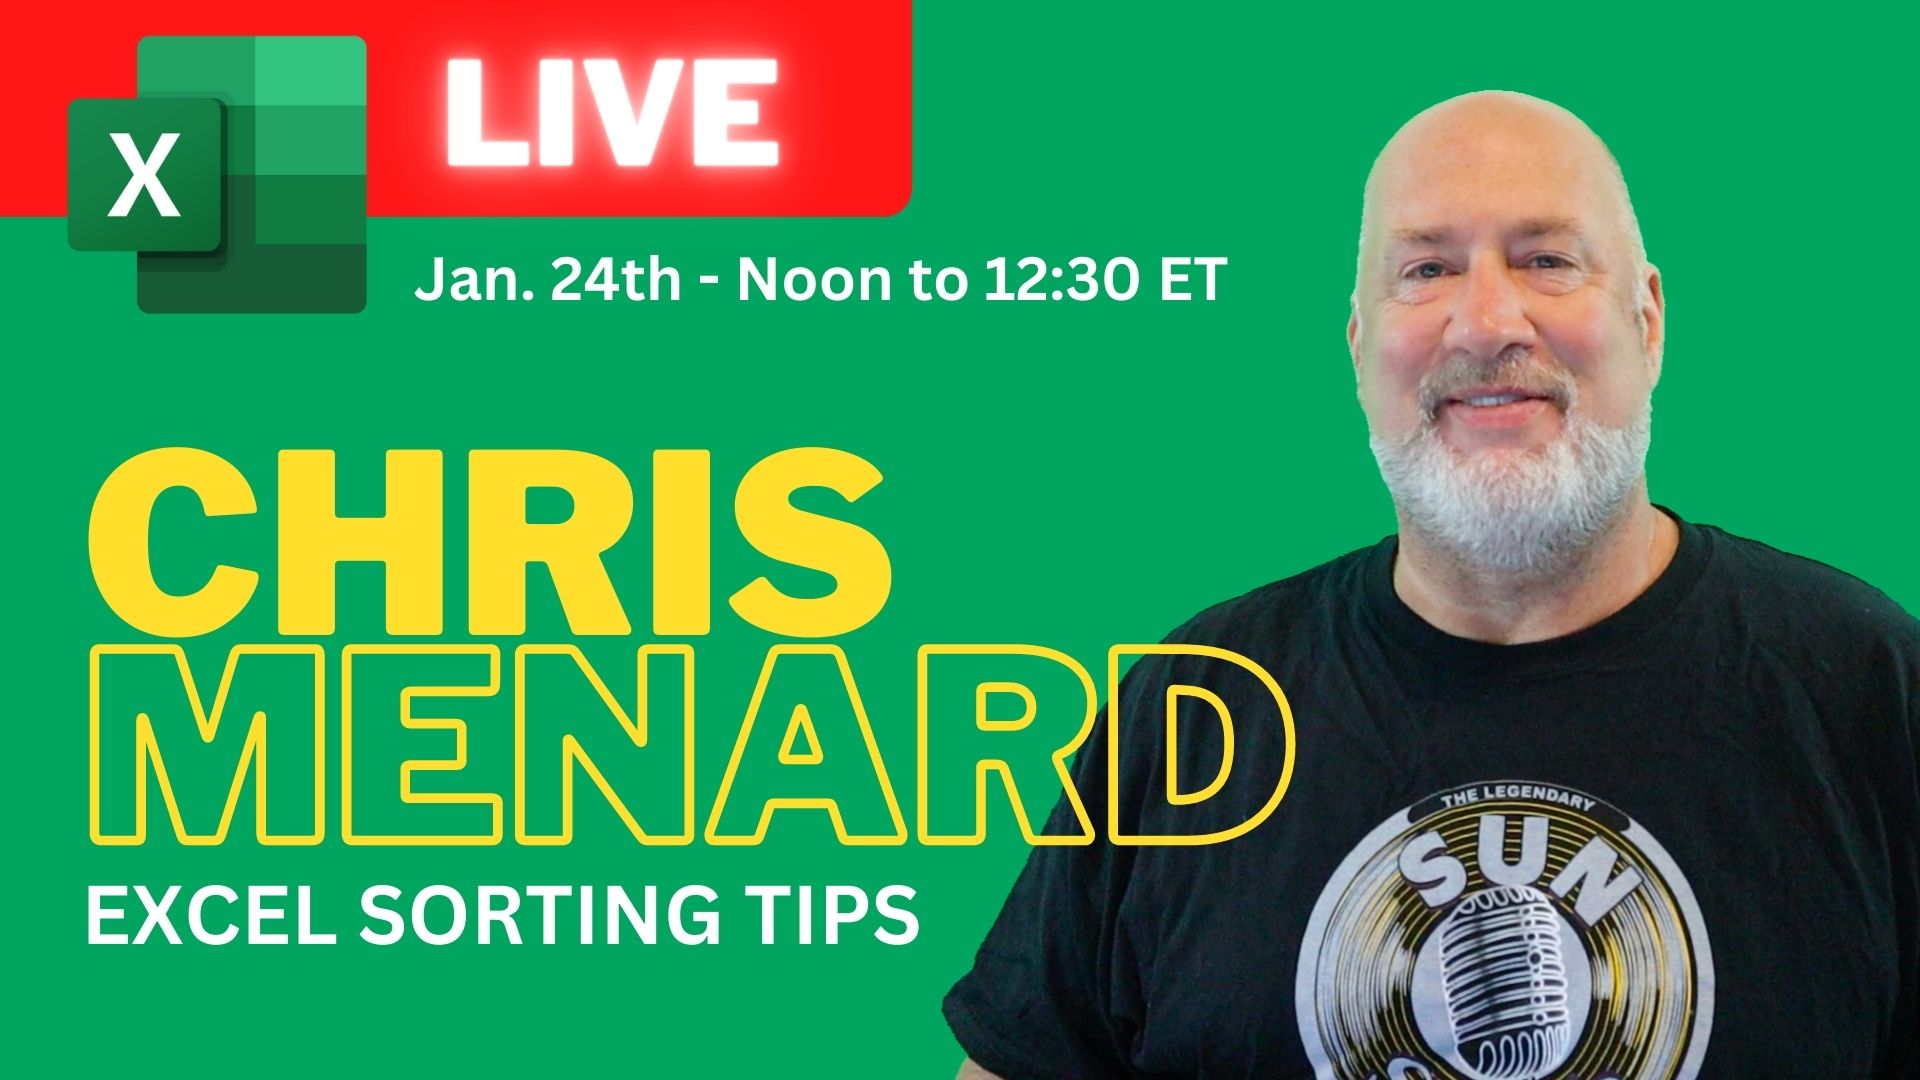 Excel Sorting Tips with Chris Menard on January 24, 2023